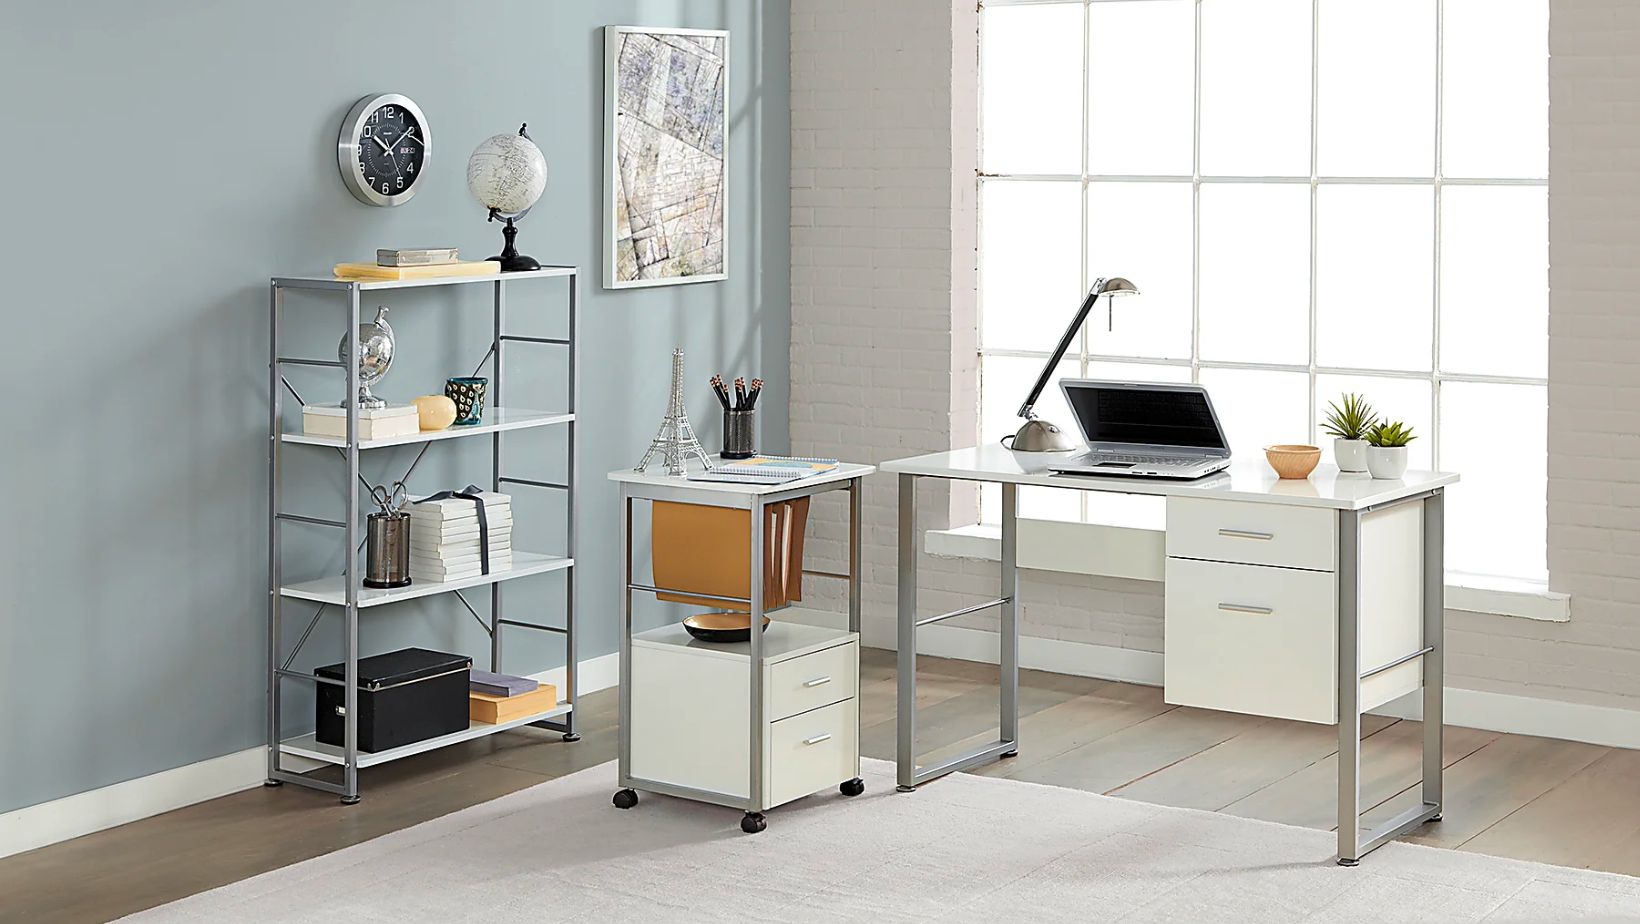 3-Shelf Contemporary Bookcase at Office Depot